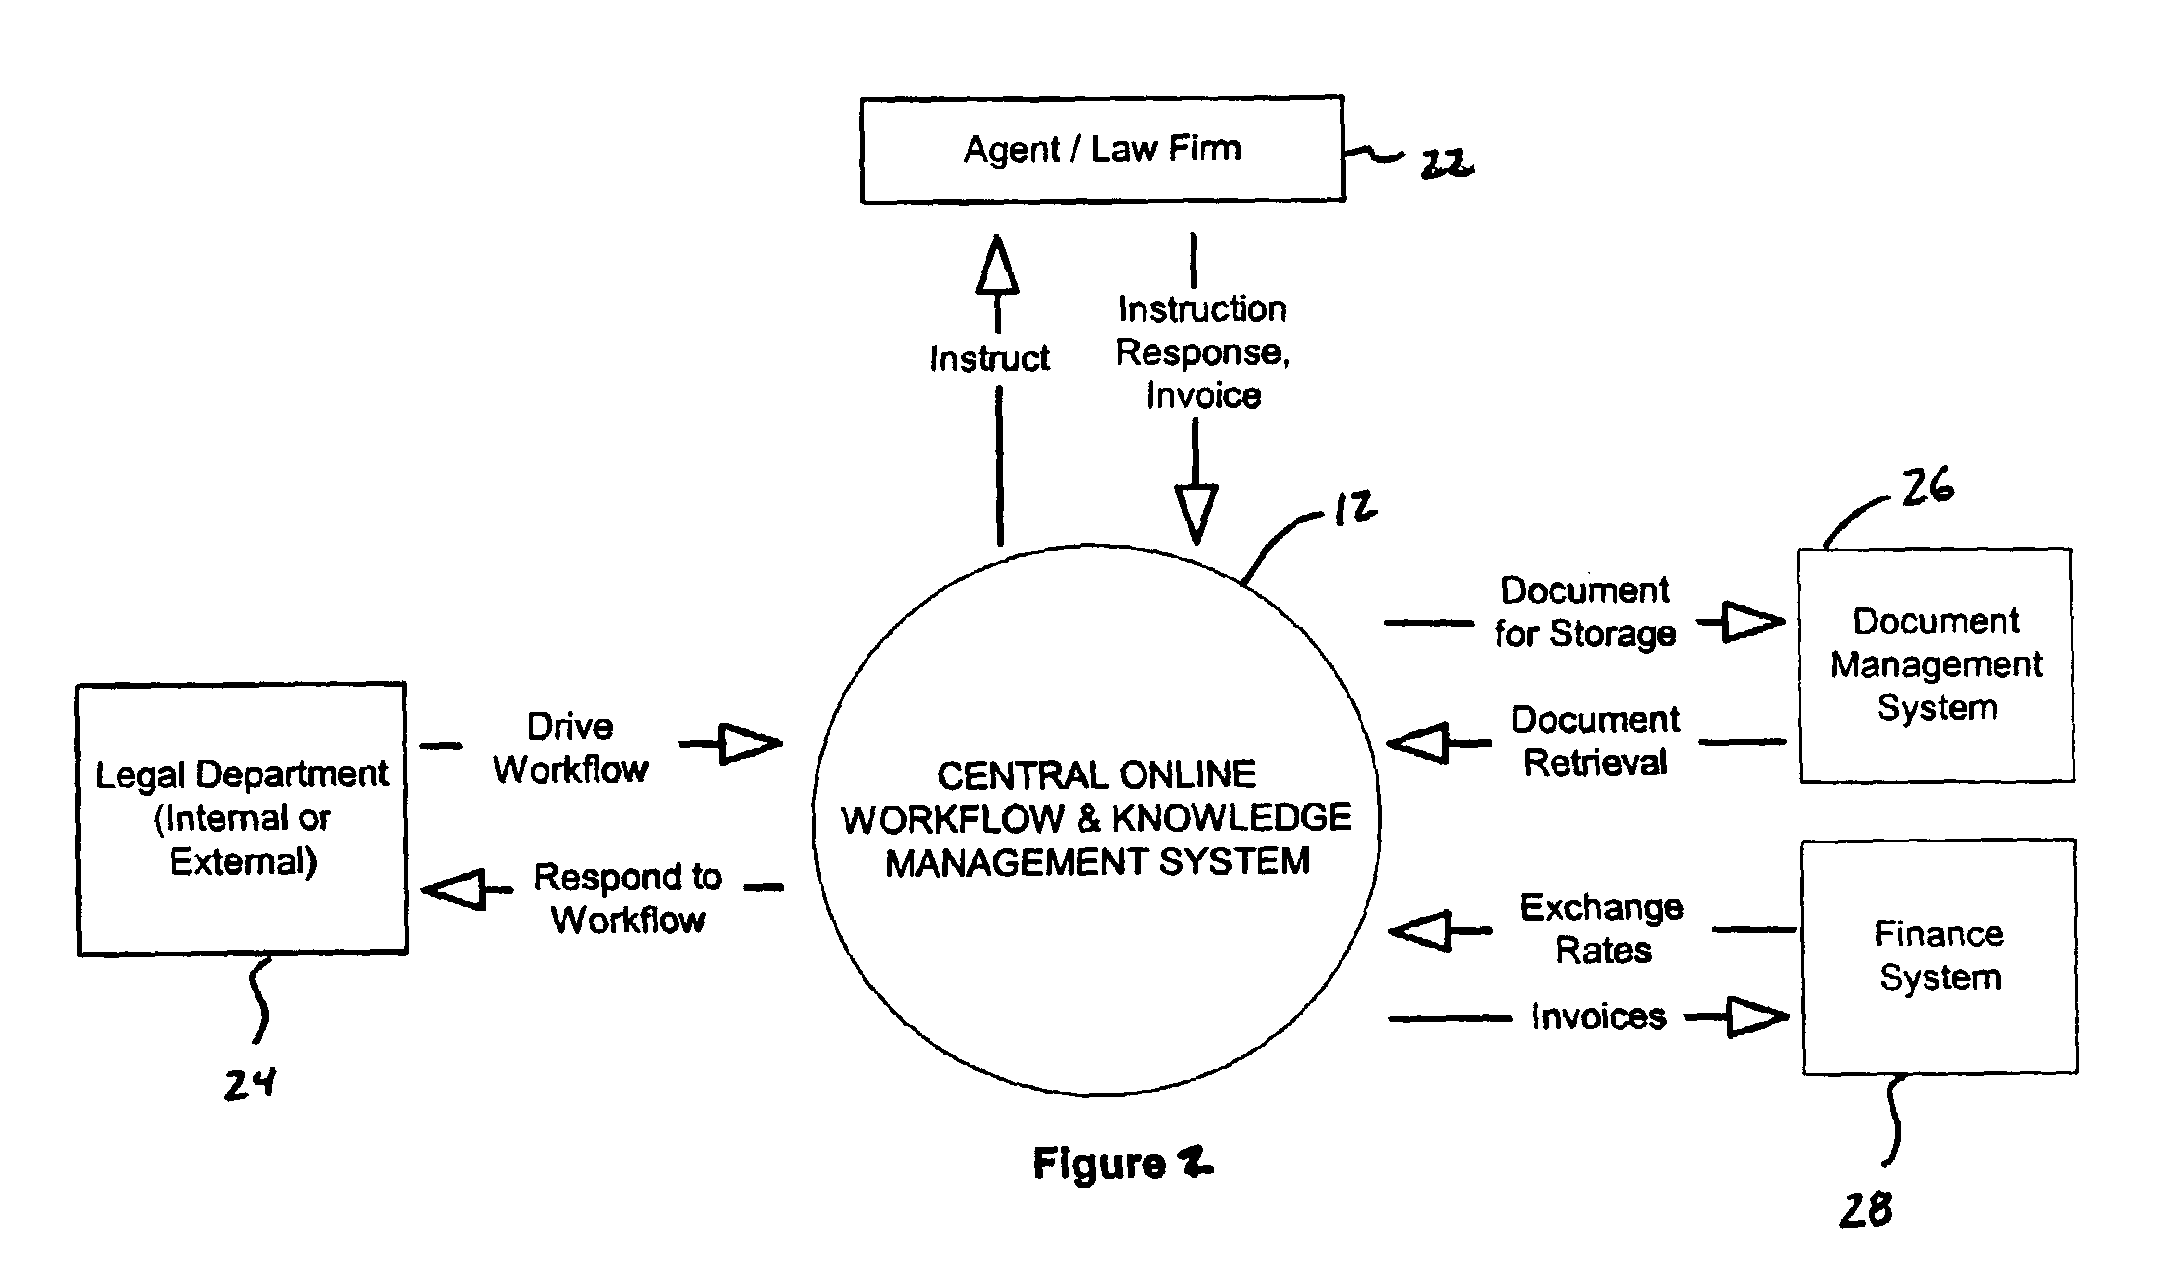 Method and system for role-based access control to a collaborative online legal workflow tool